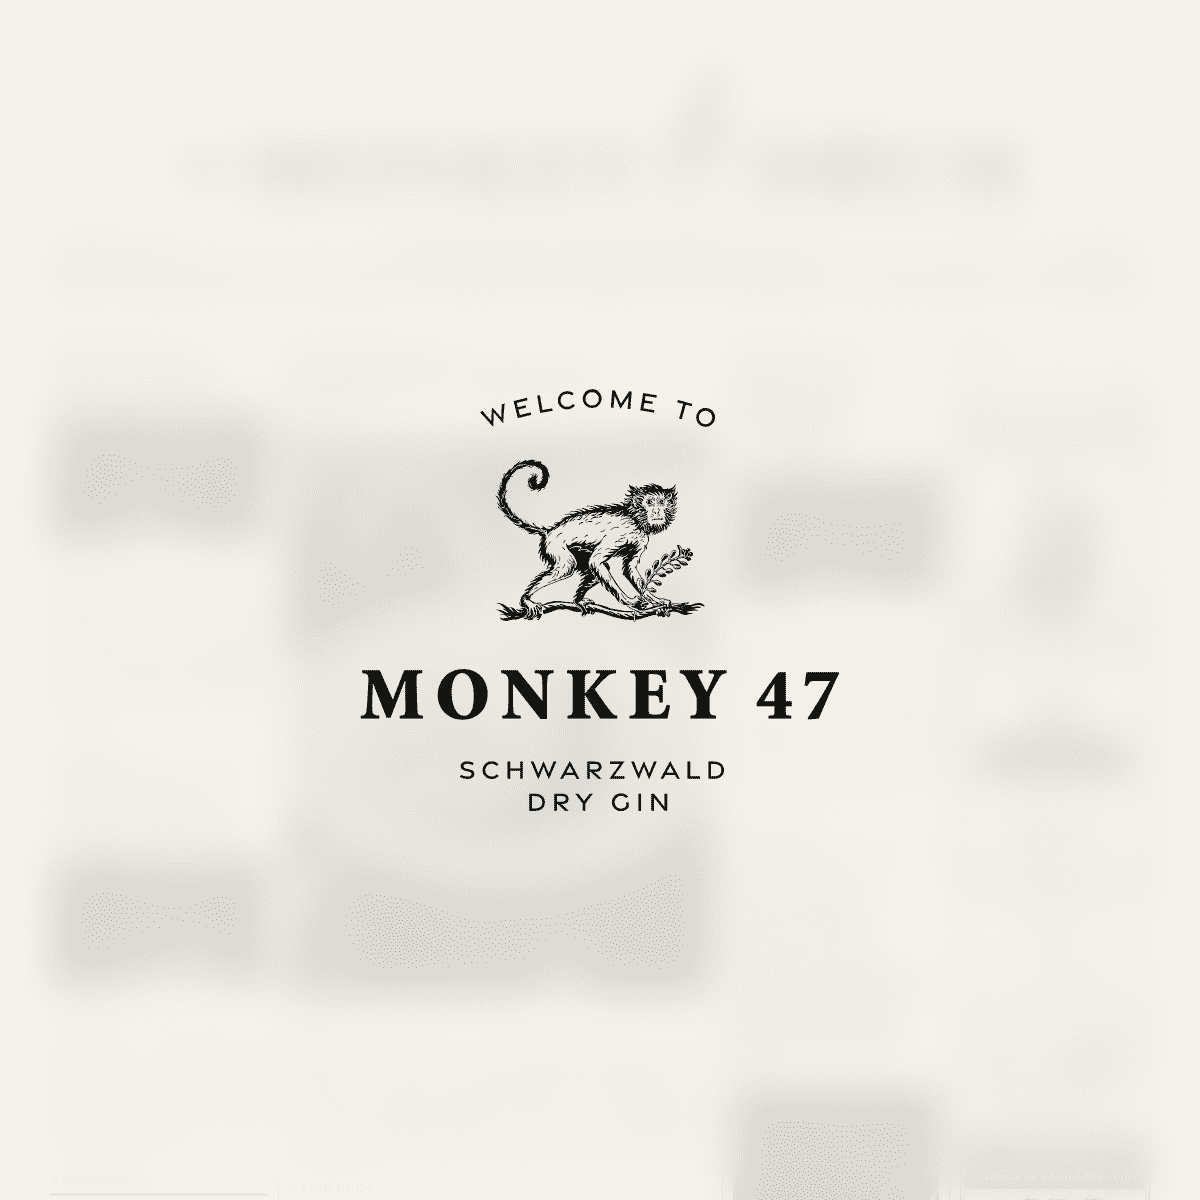 A complete backup of https://monkey47.com